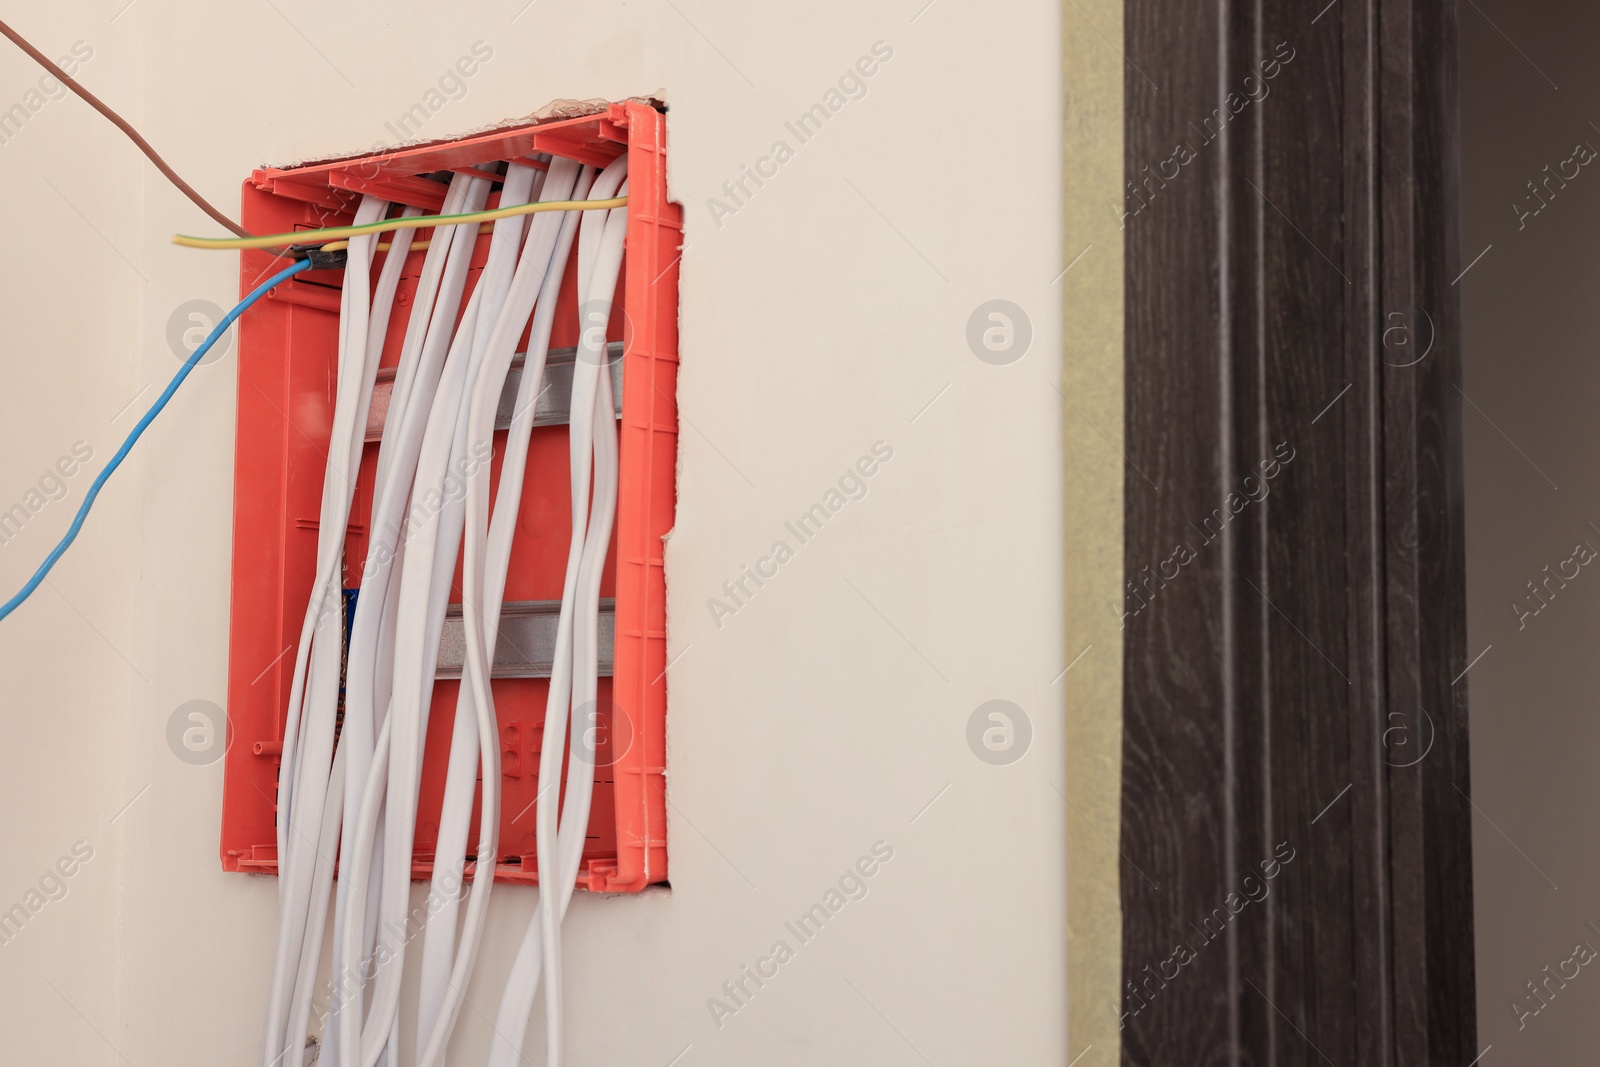 Photo of Switchboard with wires on wall indoors, space for text